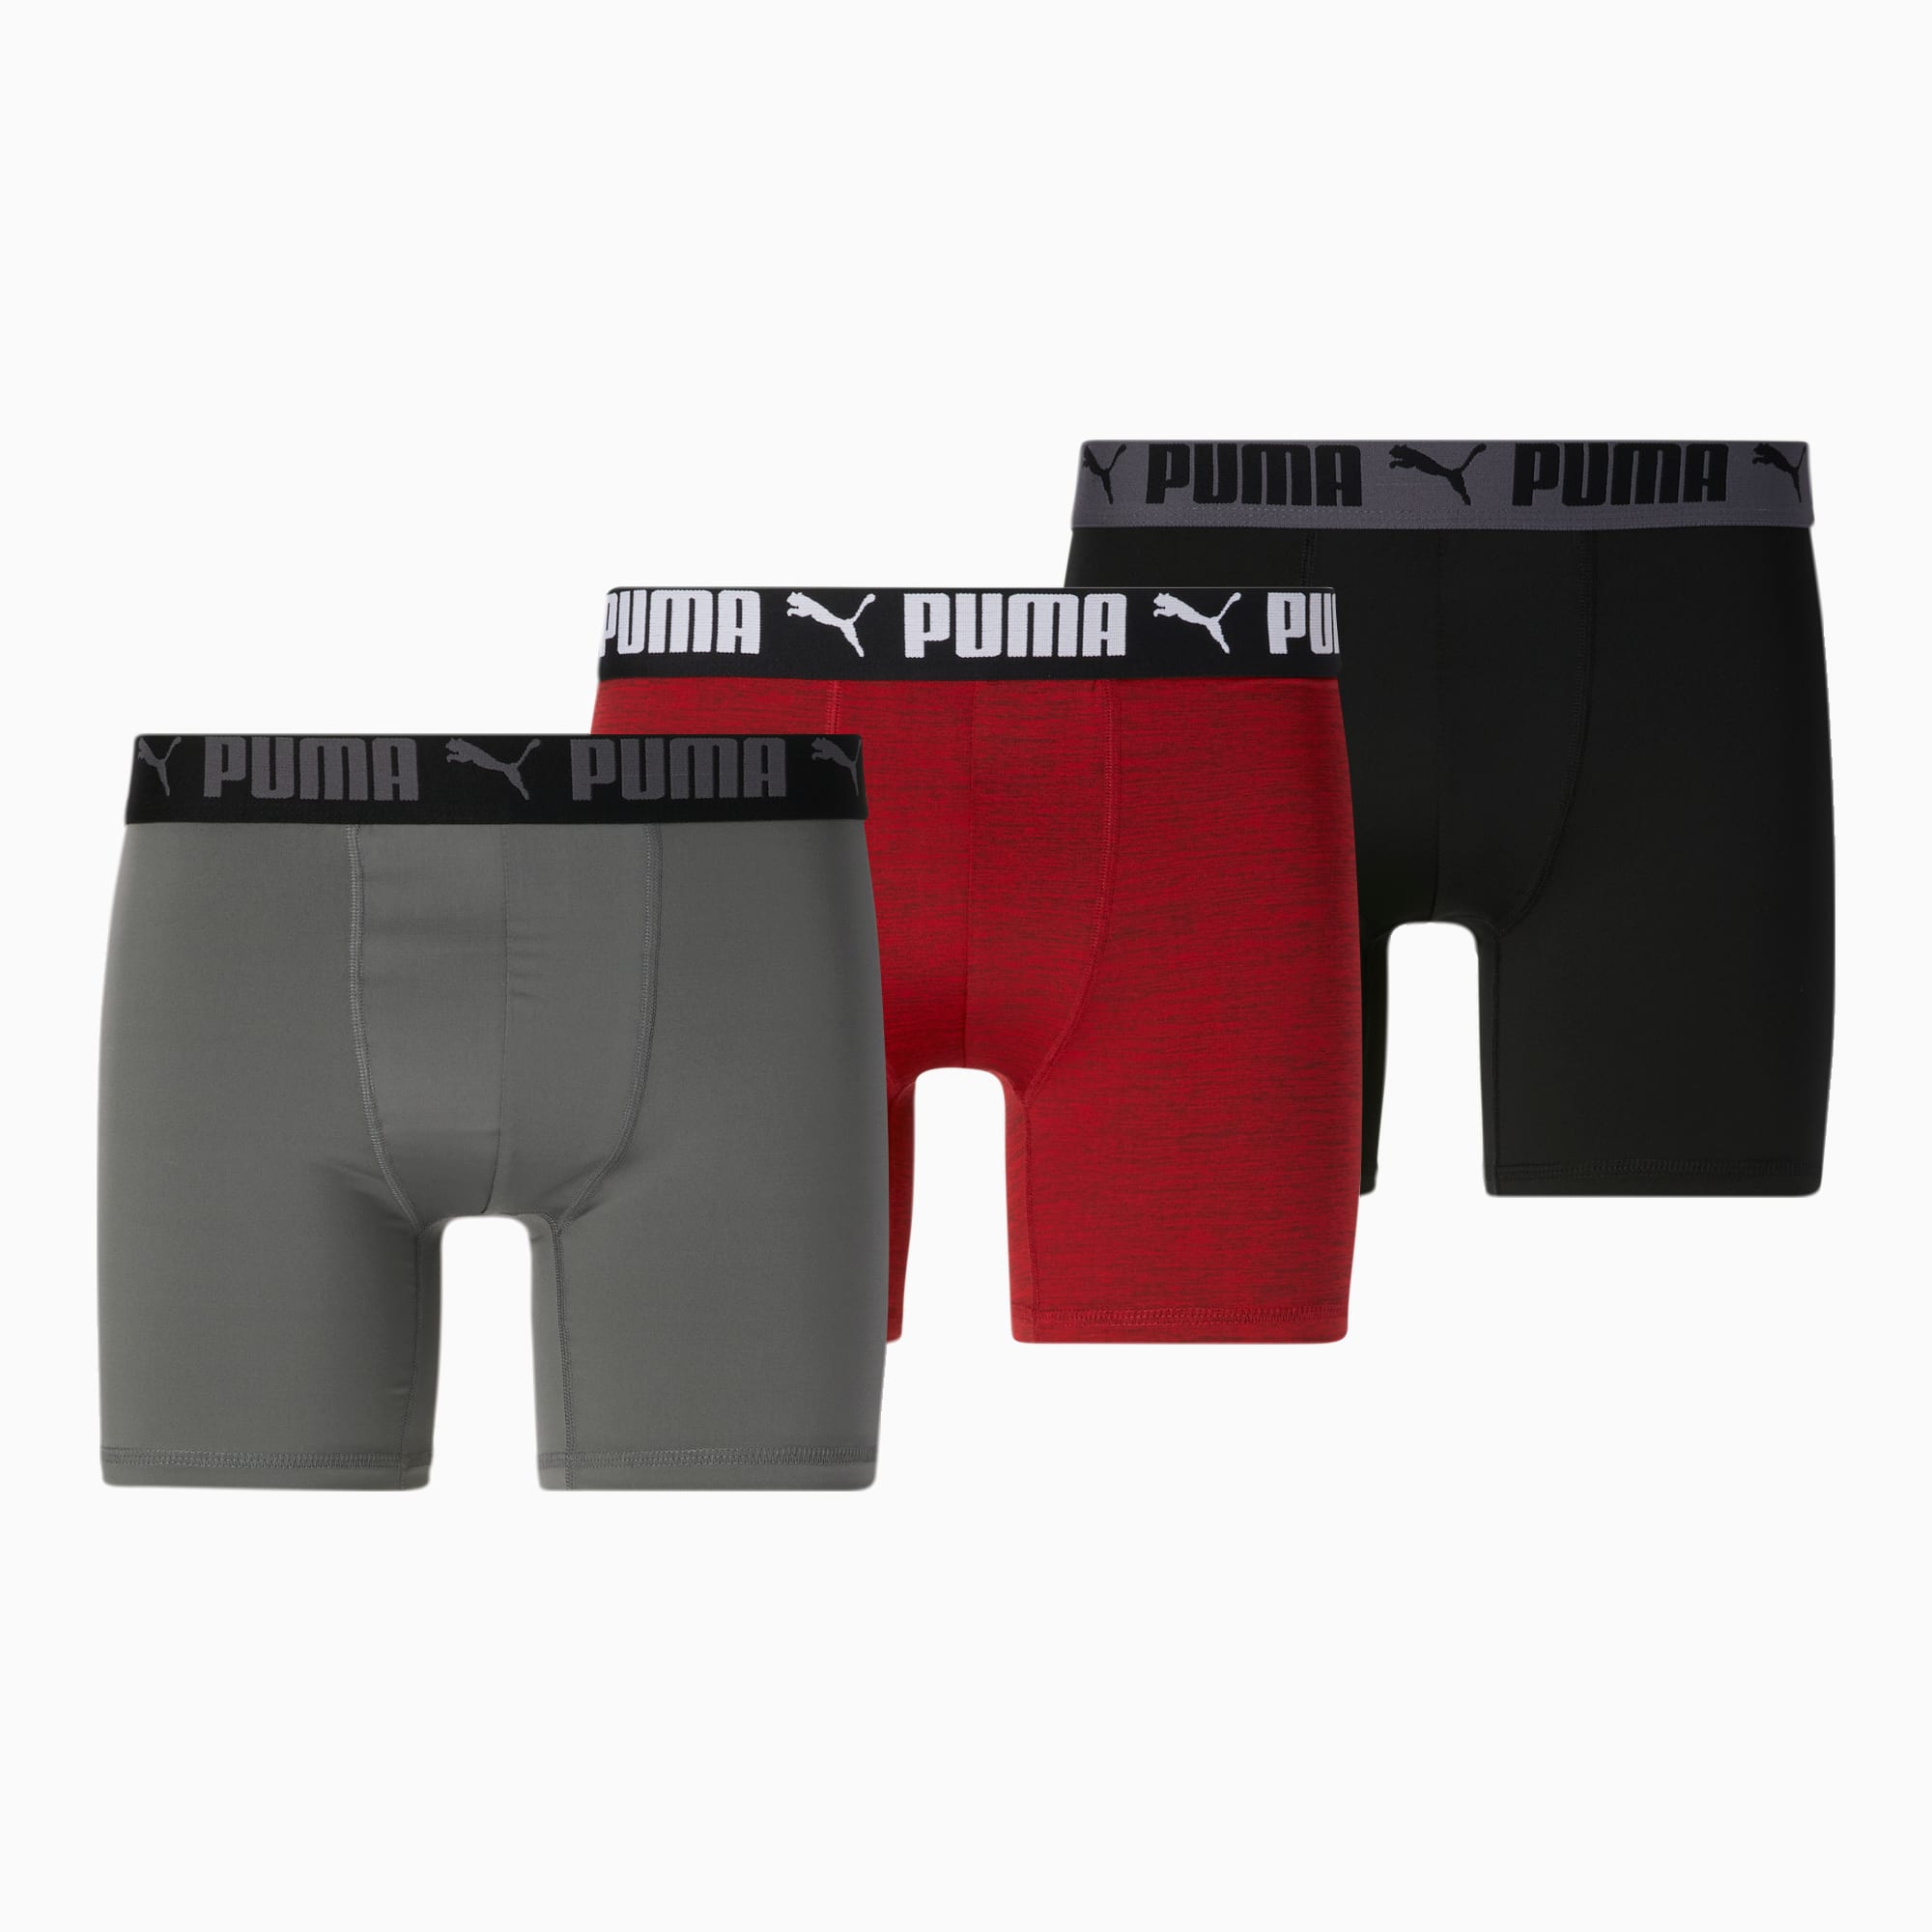 PUMA - Active Sports Moisture Wicking Boxer Briefs, 5 Pack, X-Large